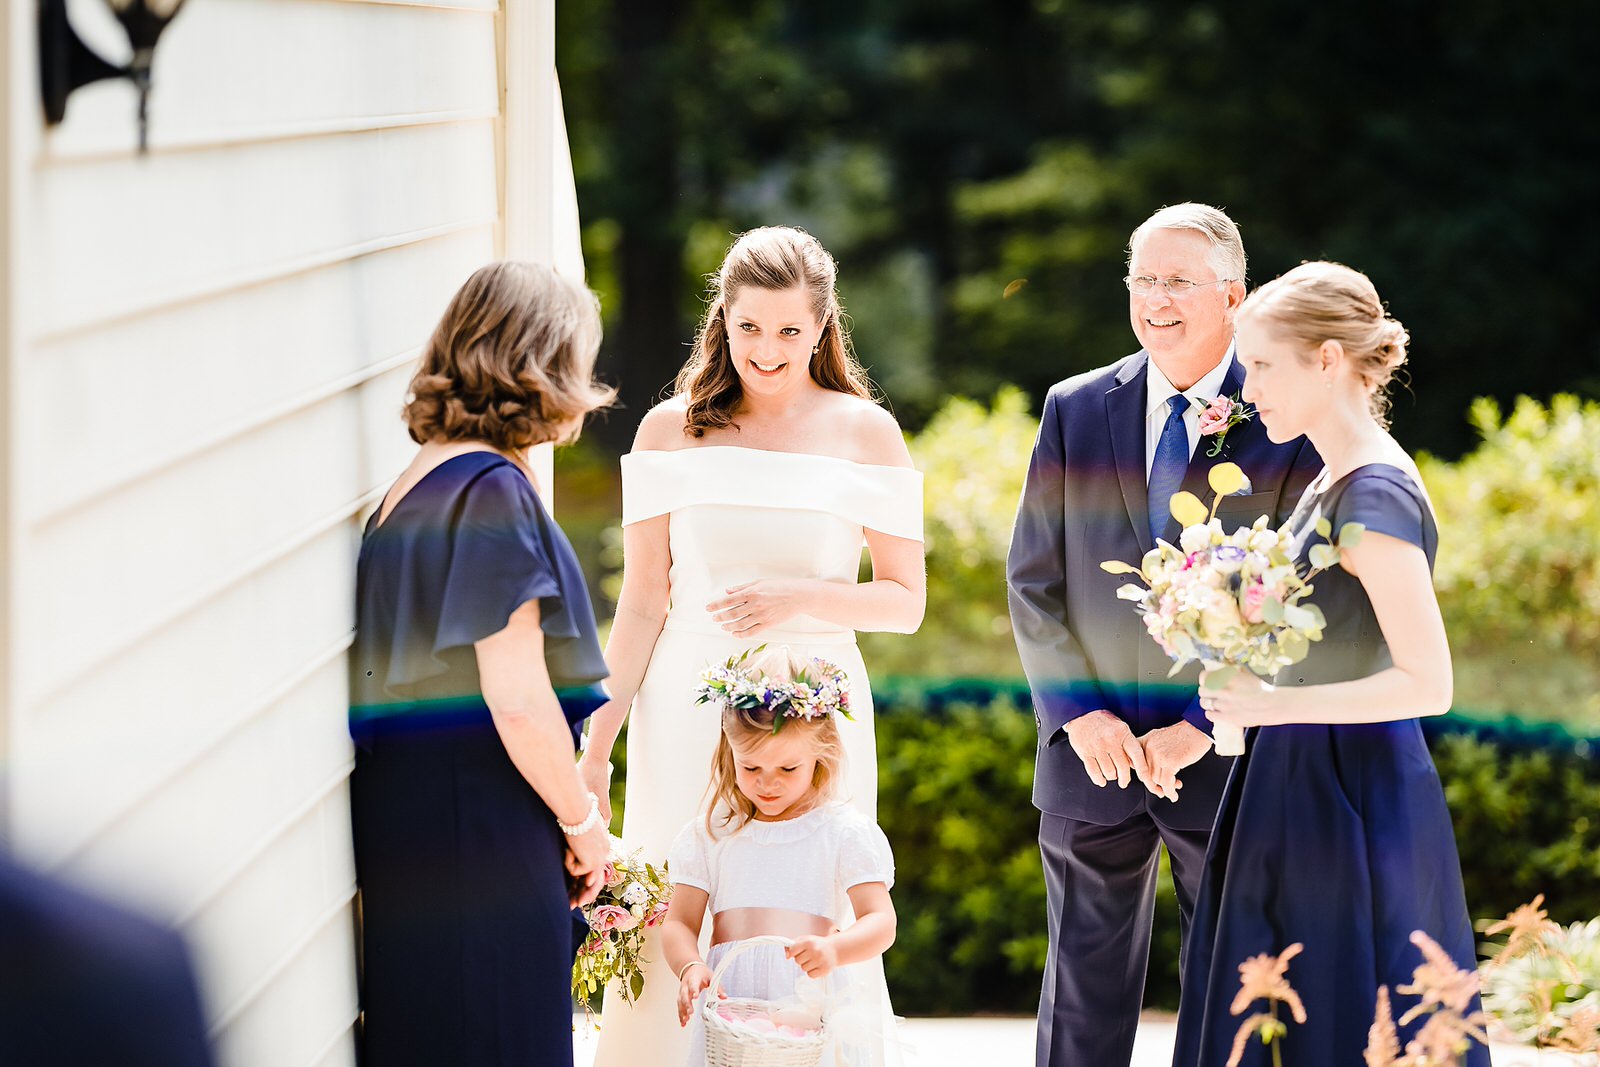 Bride waits with her father, sister, and flower girl before her backyard wedding ceremony starts